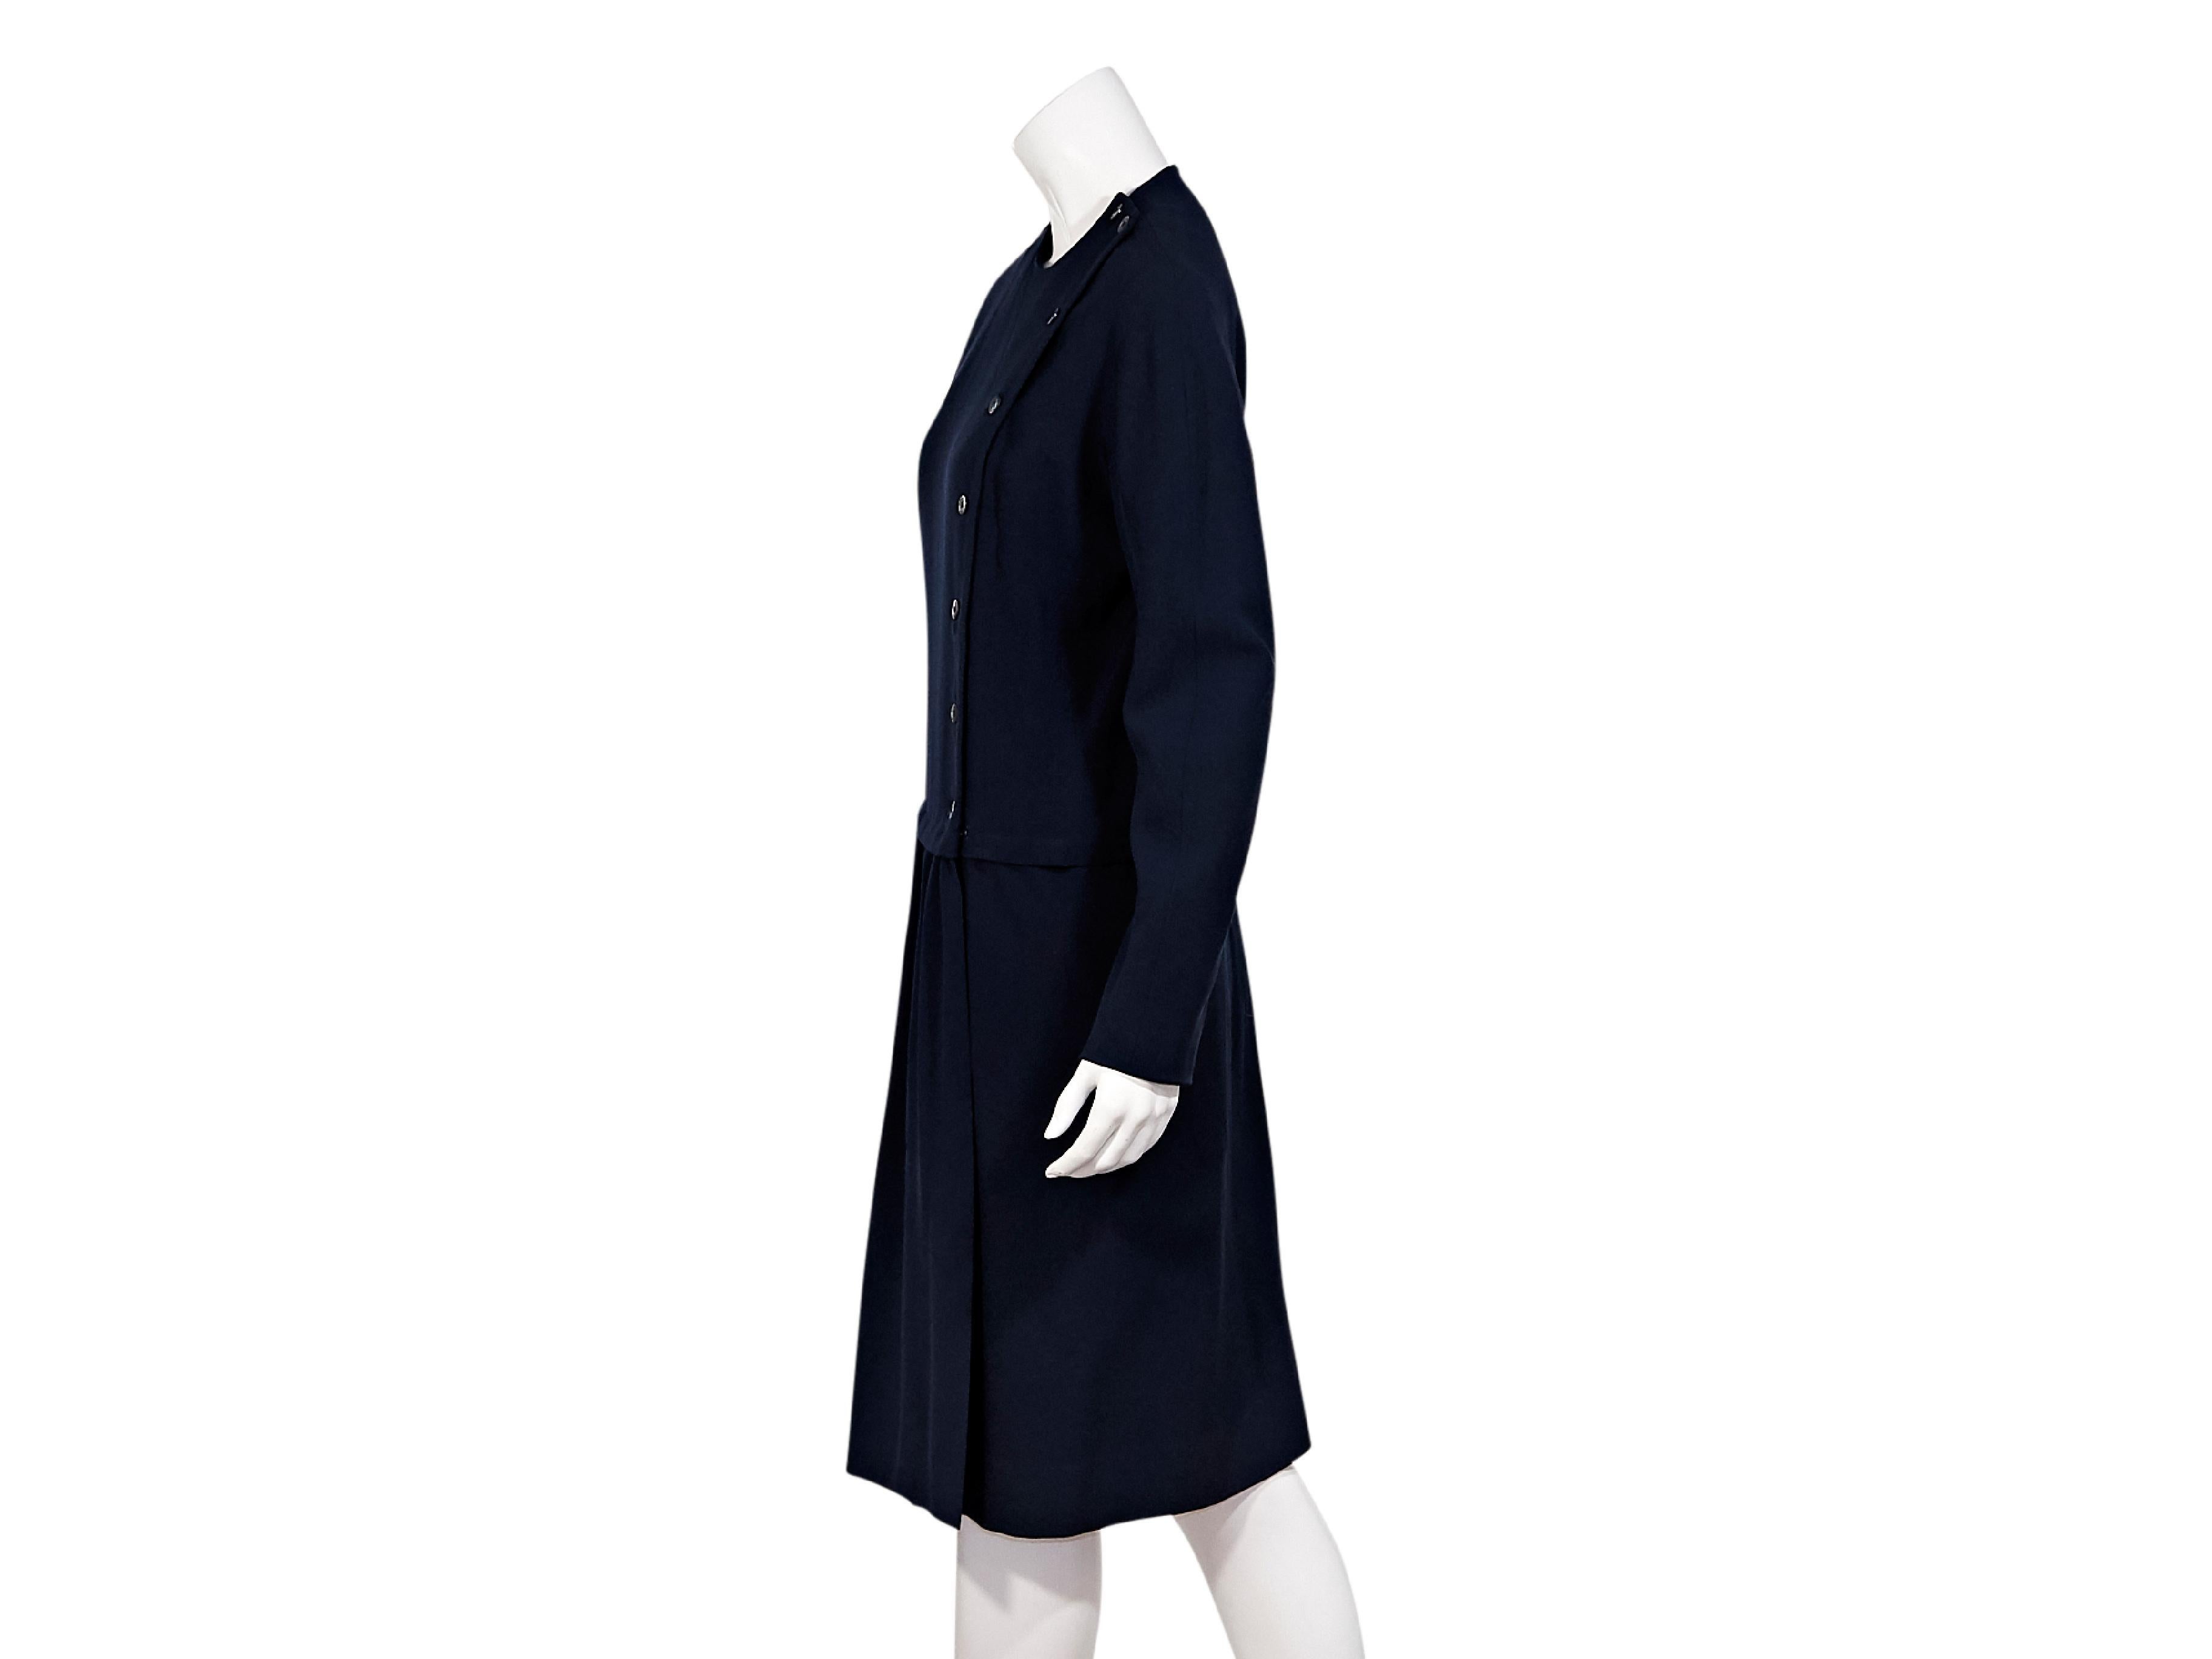 Product details:  Vintage navy blue wool dress by Hermes.  Crewneck.  Long sleeves.  Asymmetrical button-front closure.  40